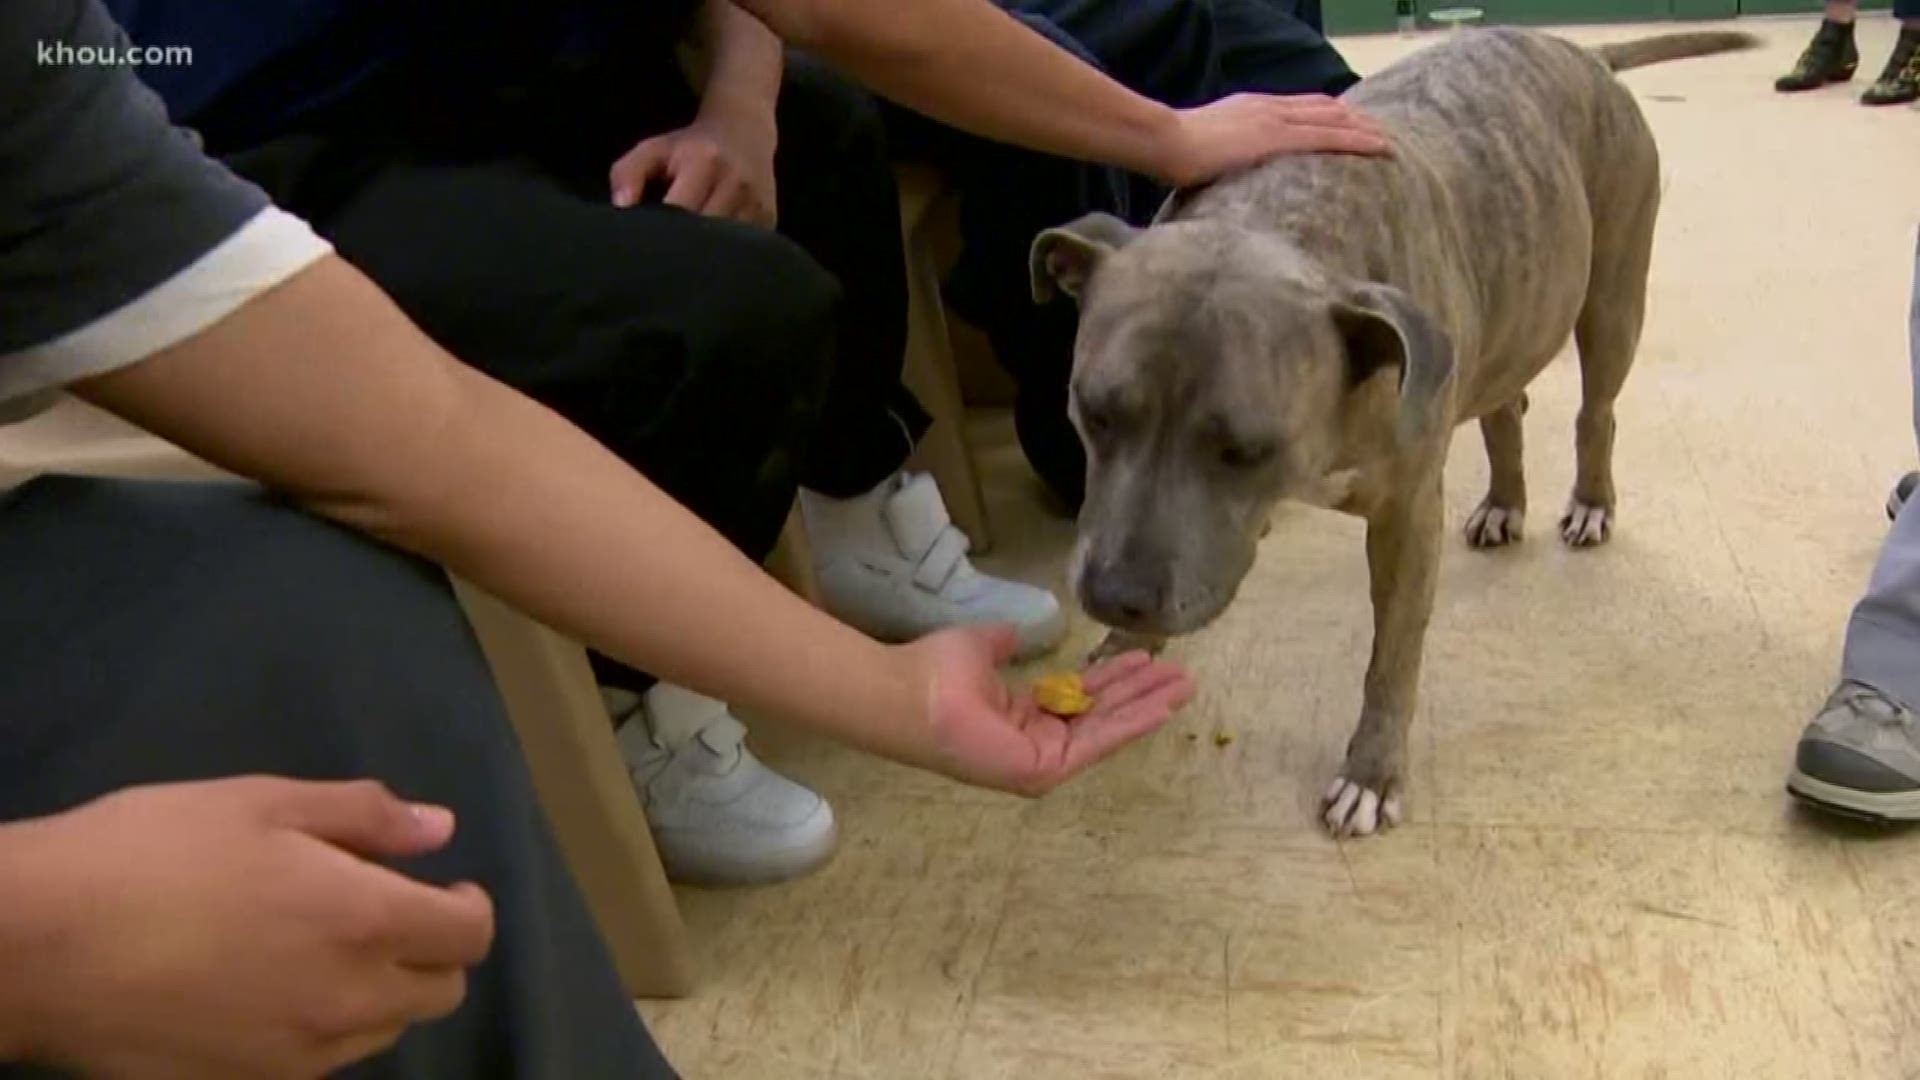 Sonny the rescue dog helps juveniles mend emotional wounds 